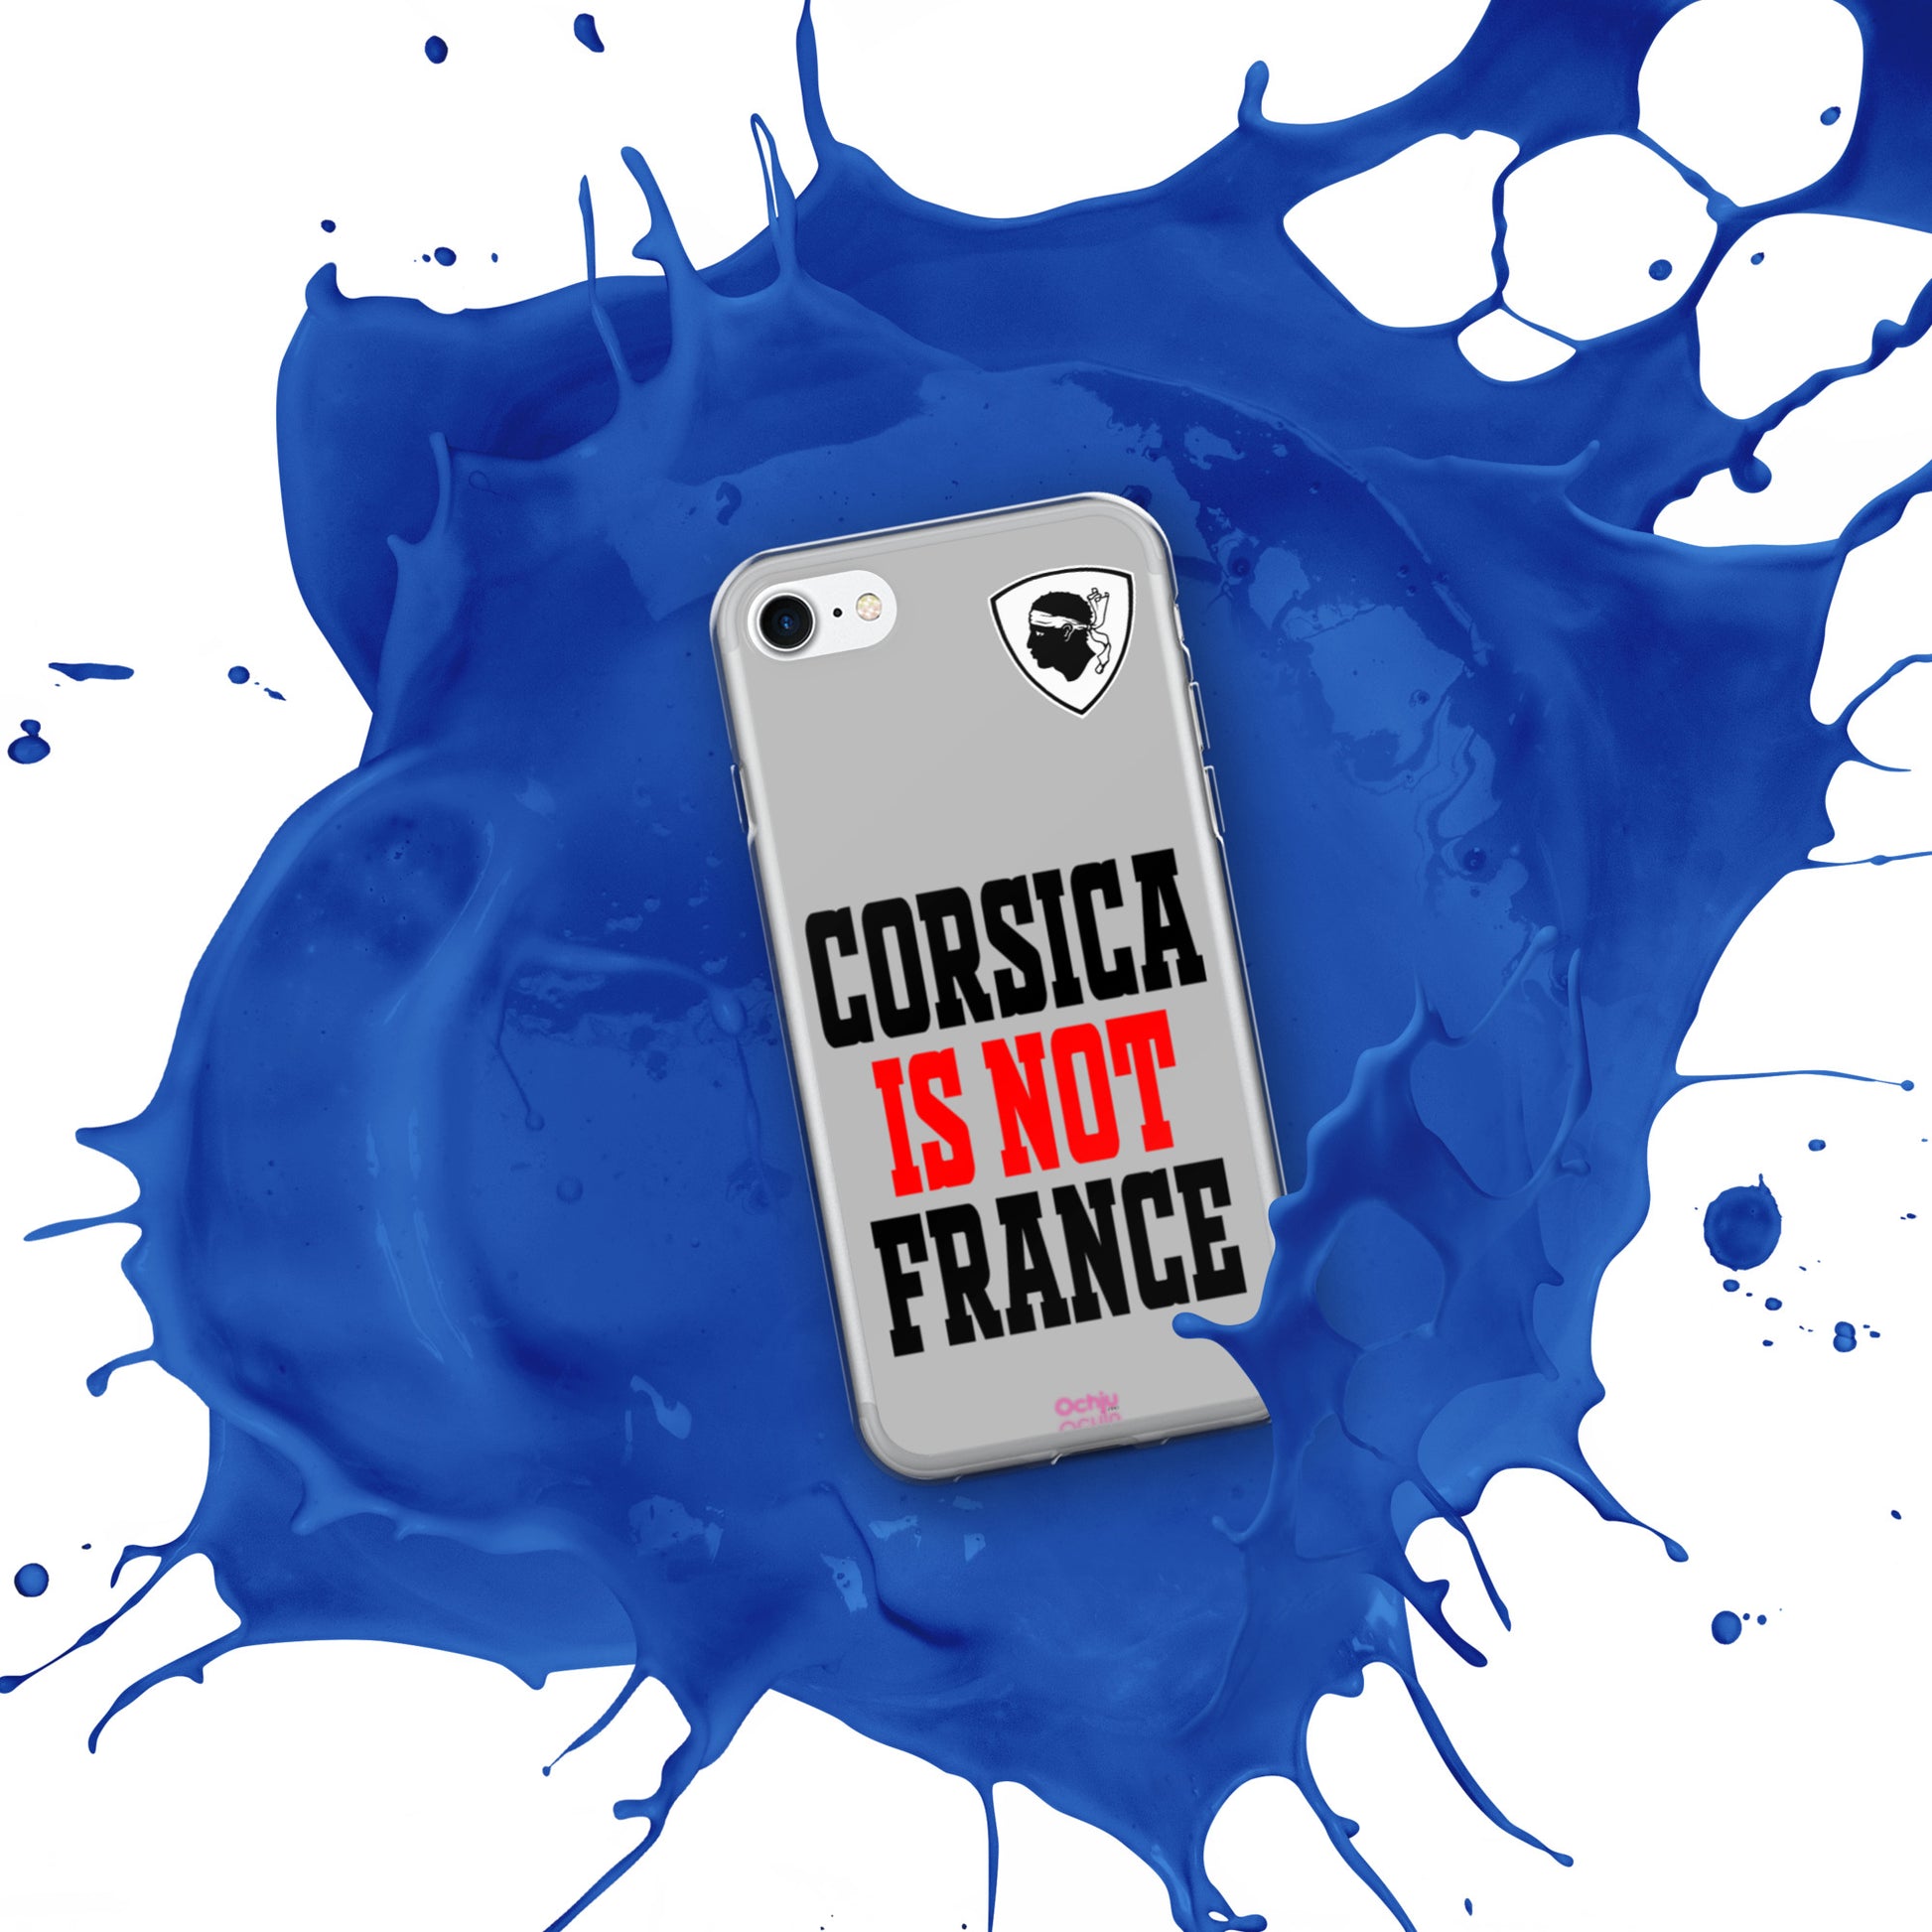 Coque pour iPhone Corsica is not France - Ochju Ochju iPhone 7 / 8 Ochju Coque pour iPhone Corsica is not France